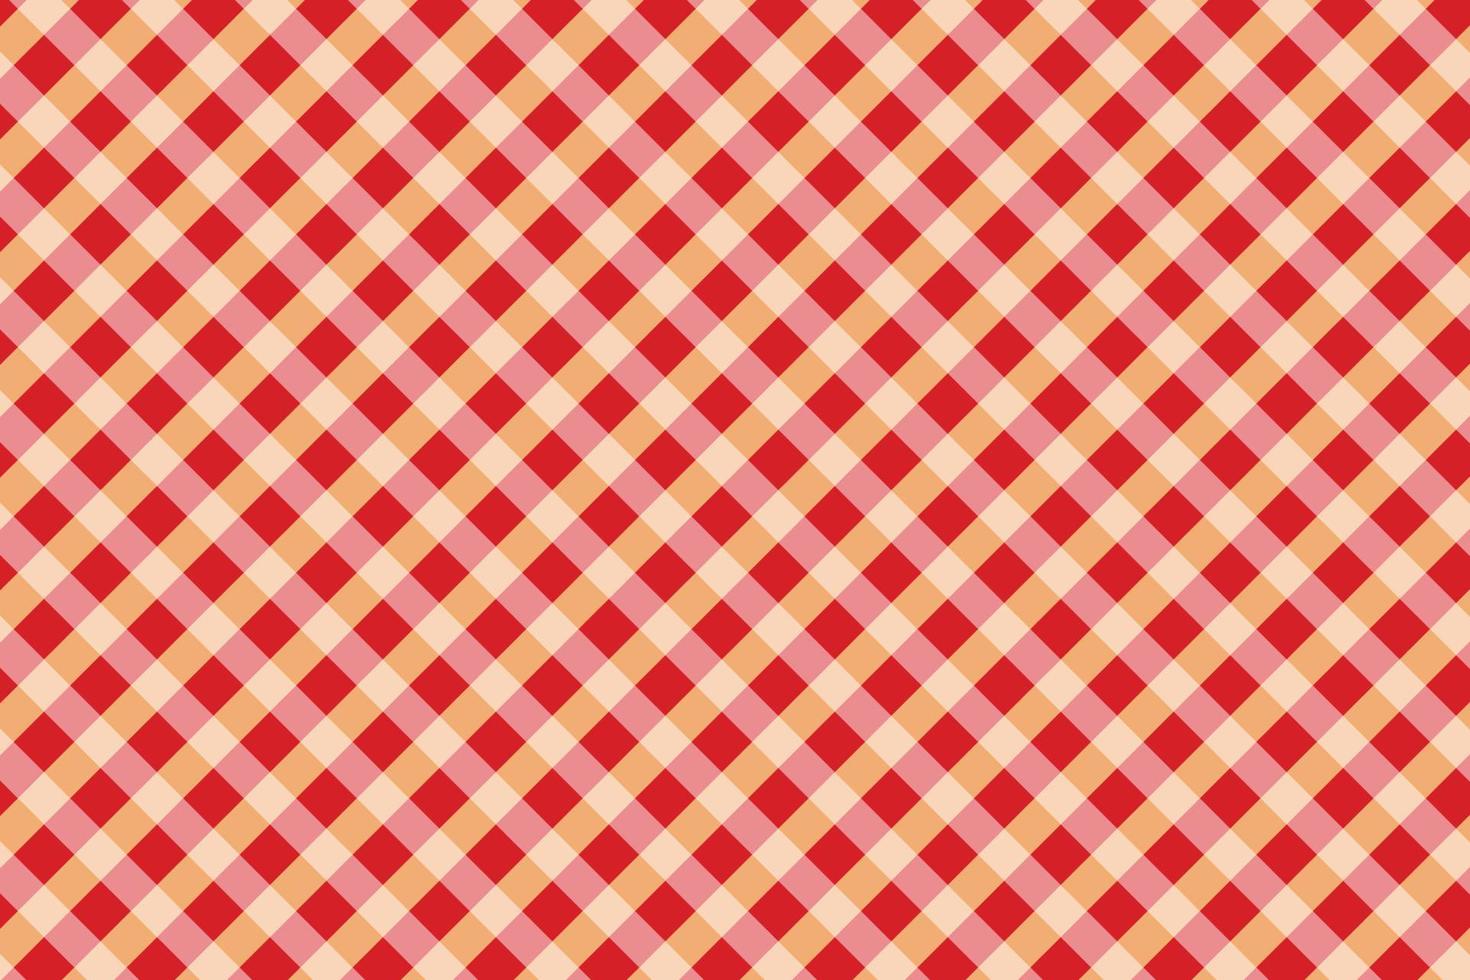 gingham pattern design, suitable for dresses, paper, tablecloths, shirts. vector